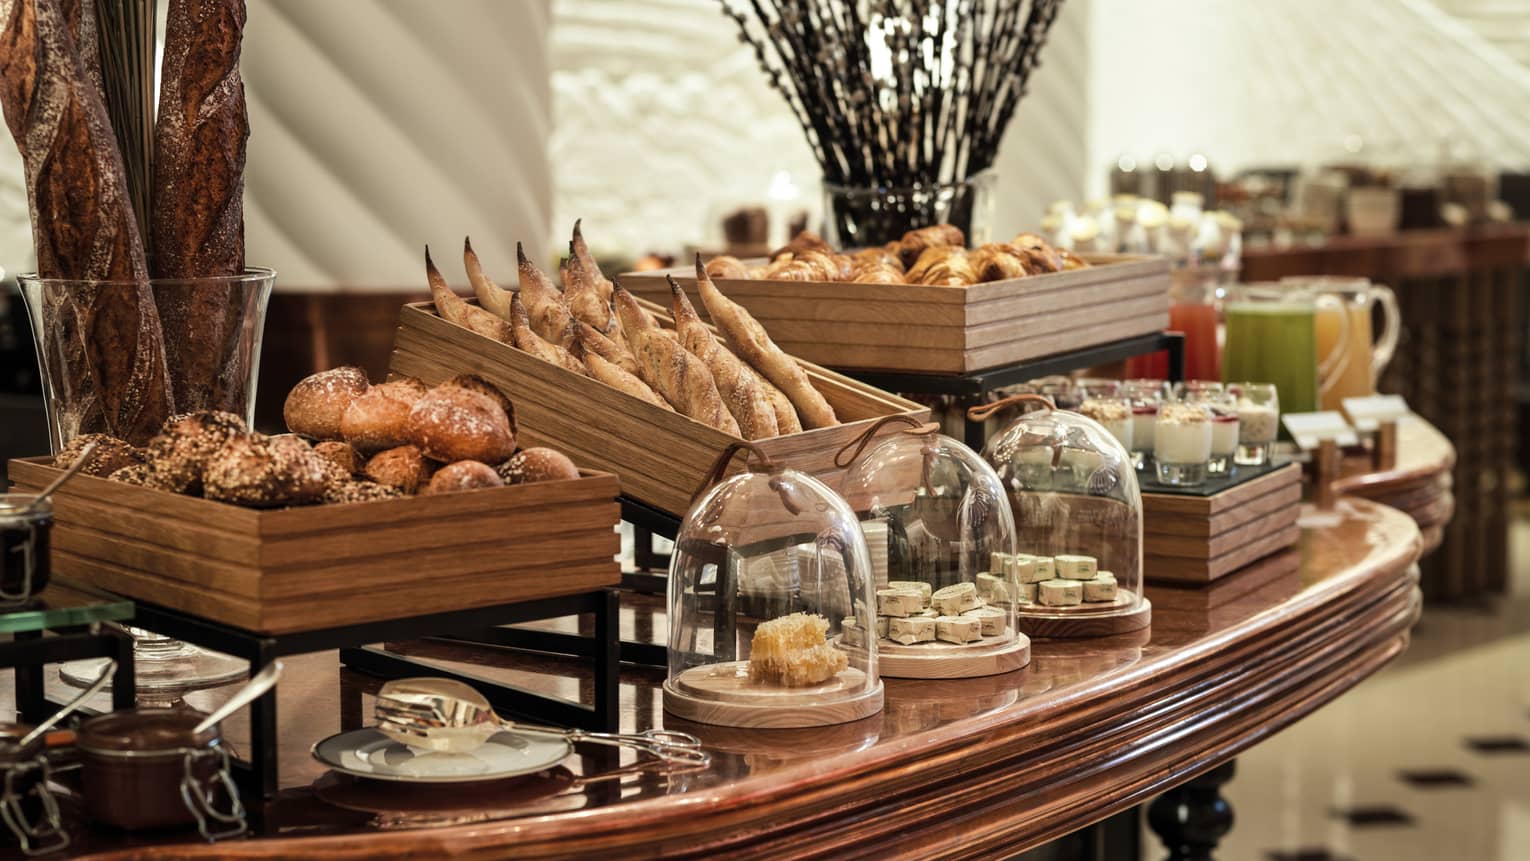 A decadent array of artisan breads and other baked goods in wooden crates and glass-covered dishes on a large wooden table.